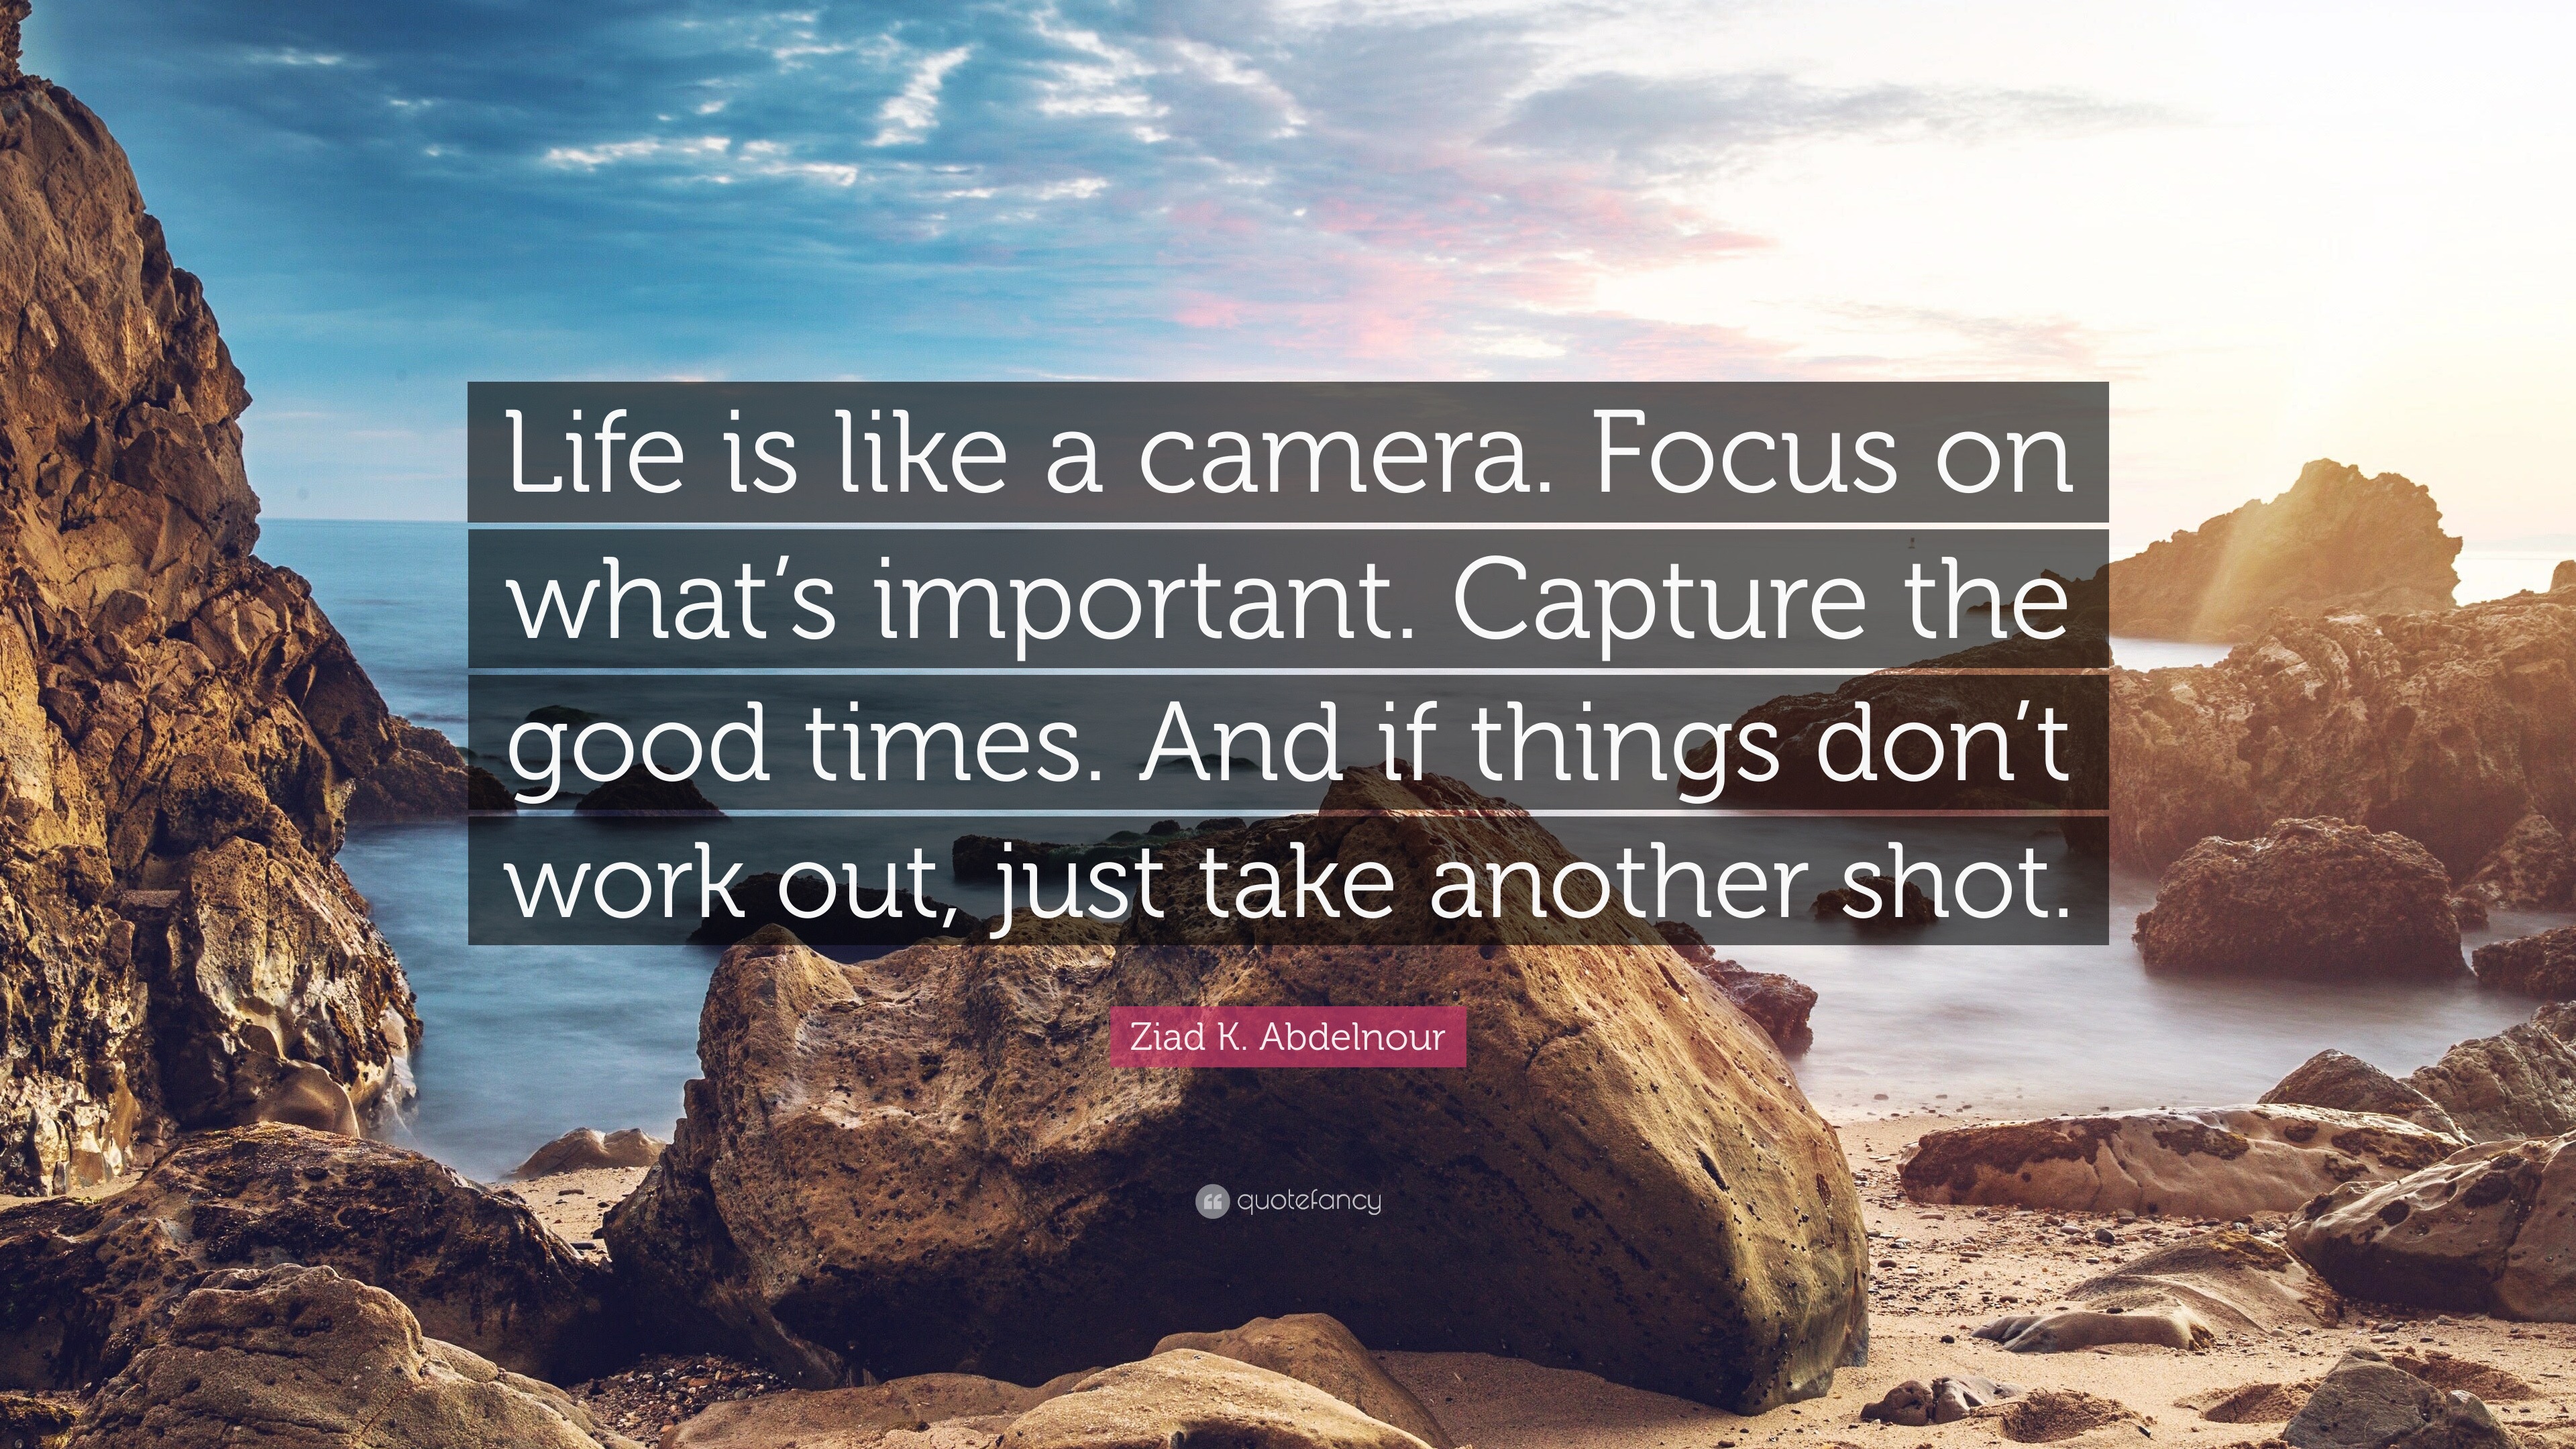 Ziad K Abdelnour Quote “Life is like a camera Focus on what s